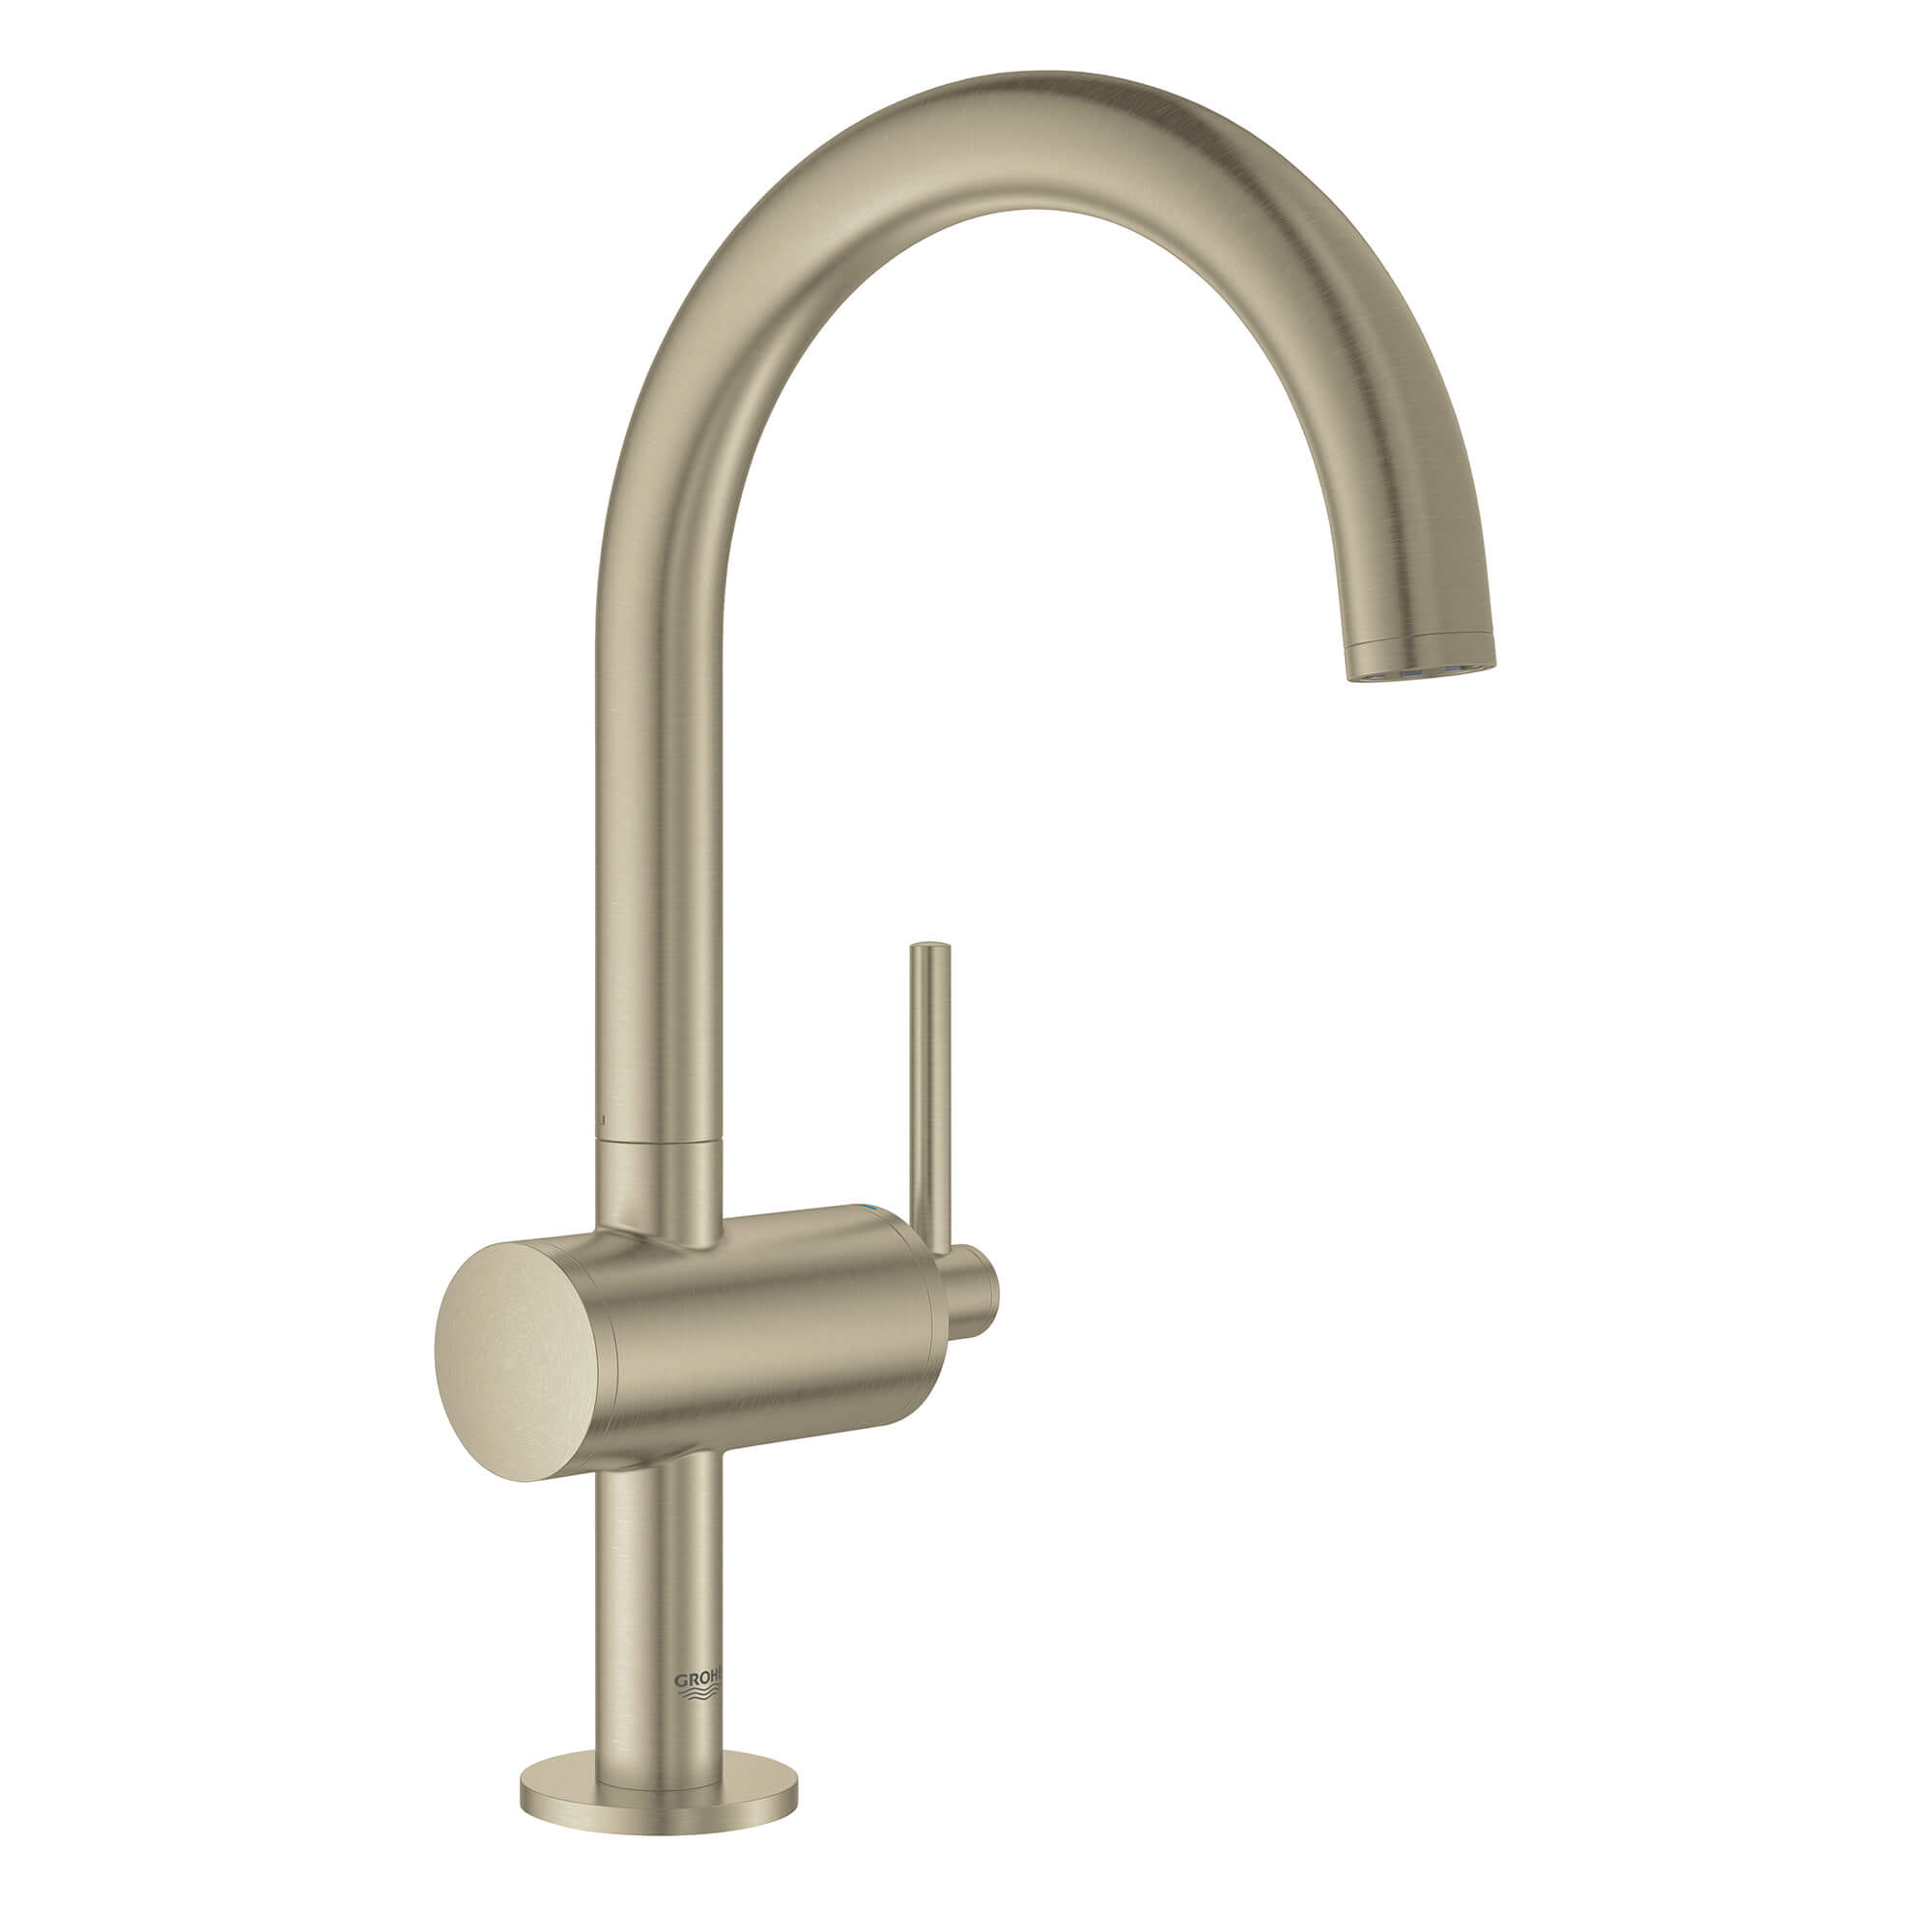 Robinet monotrou taille L BRUSHED NICKEL